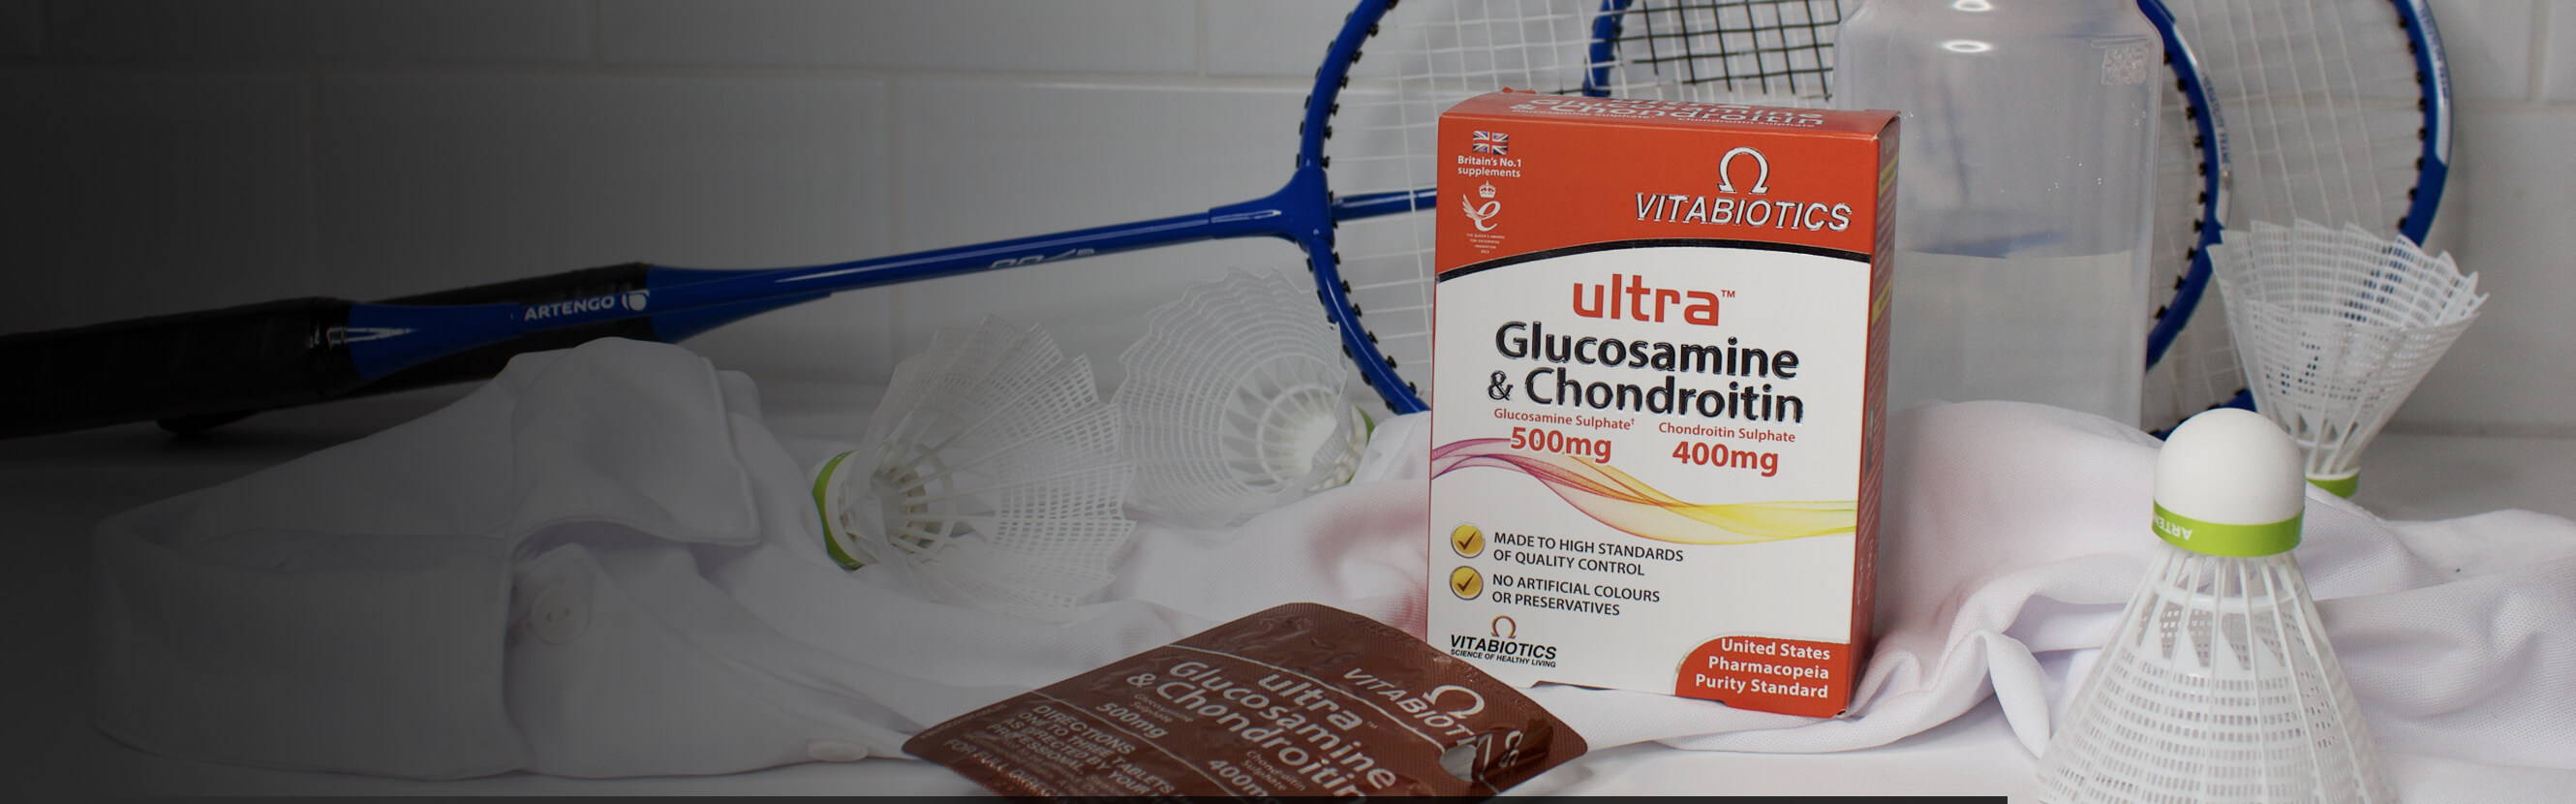  When it comes to glucosamine and chondroitin, the details of formulation make all the difference. That’s why Ultra Glucosamine & Chondroitin is scientifically formulated for quality – glucosamine in its preferred potassium form and a premium low molecular weight form of chondroitin. 